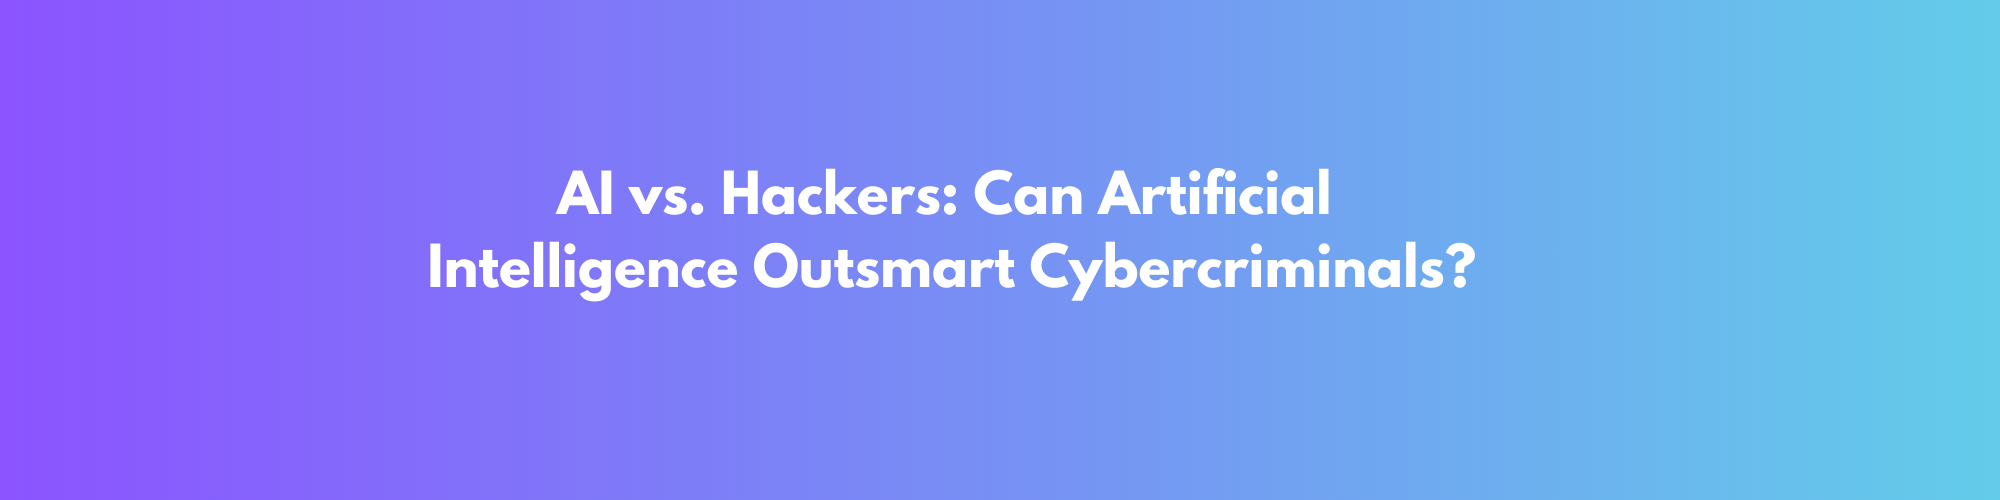 AI vs. Hackers: Can Artificial Intelligence Outsmart Cybercriminals?